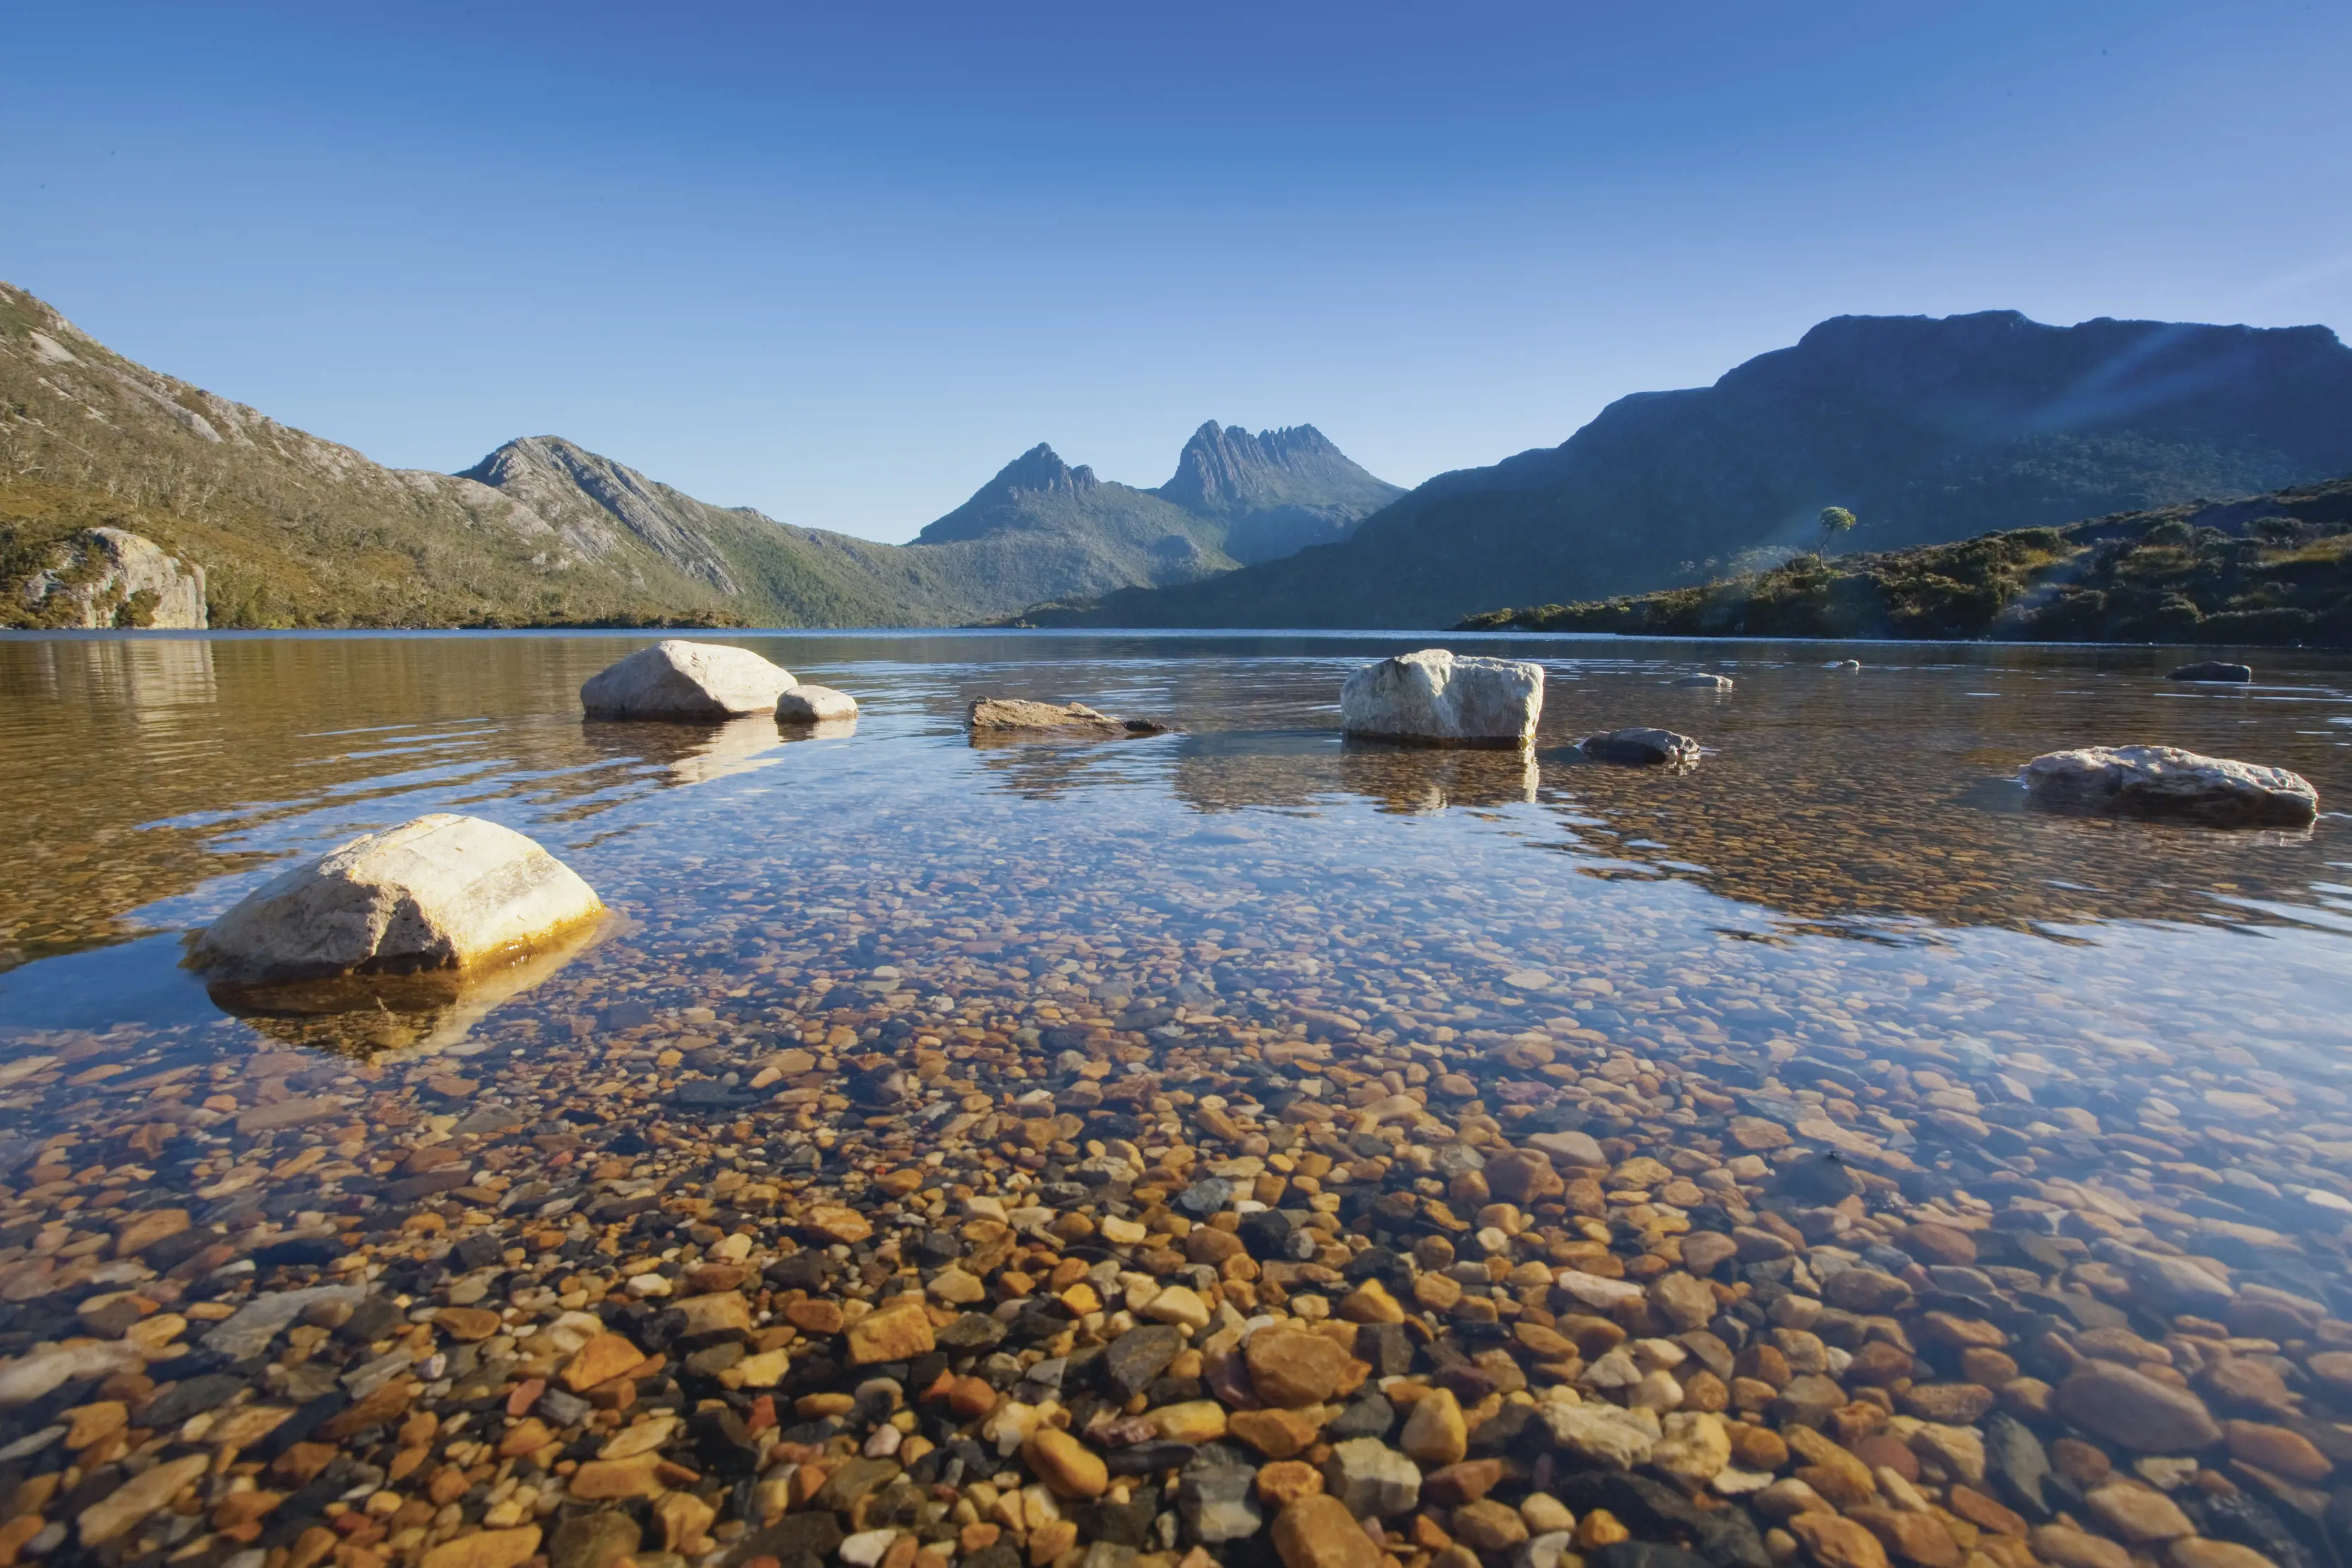 Low angle from the water, looking up at Lake Dove and Cradle Mountain